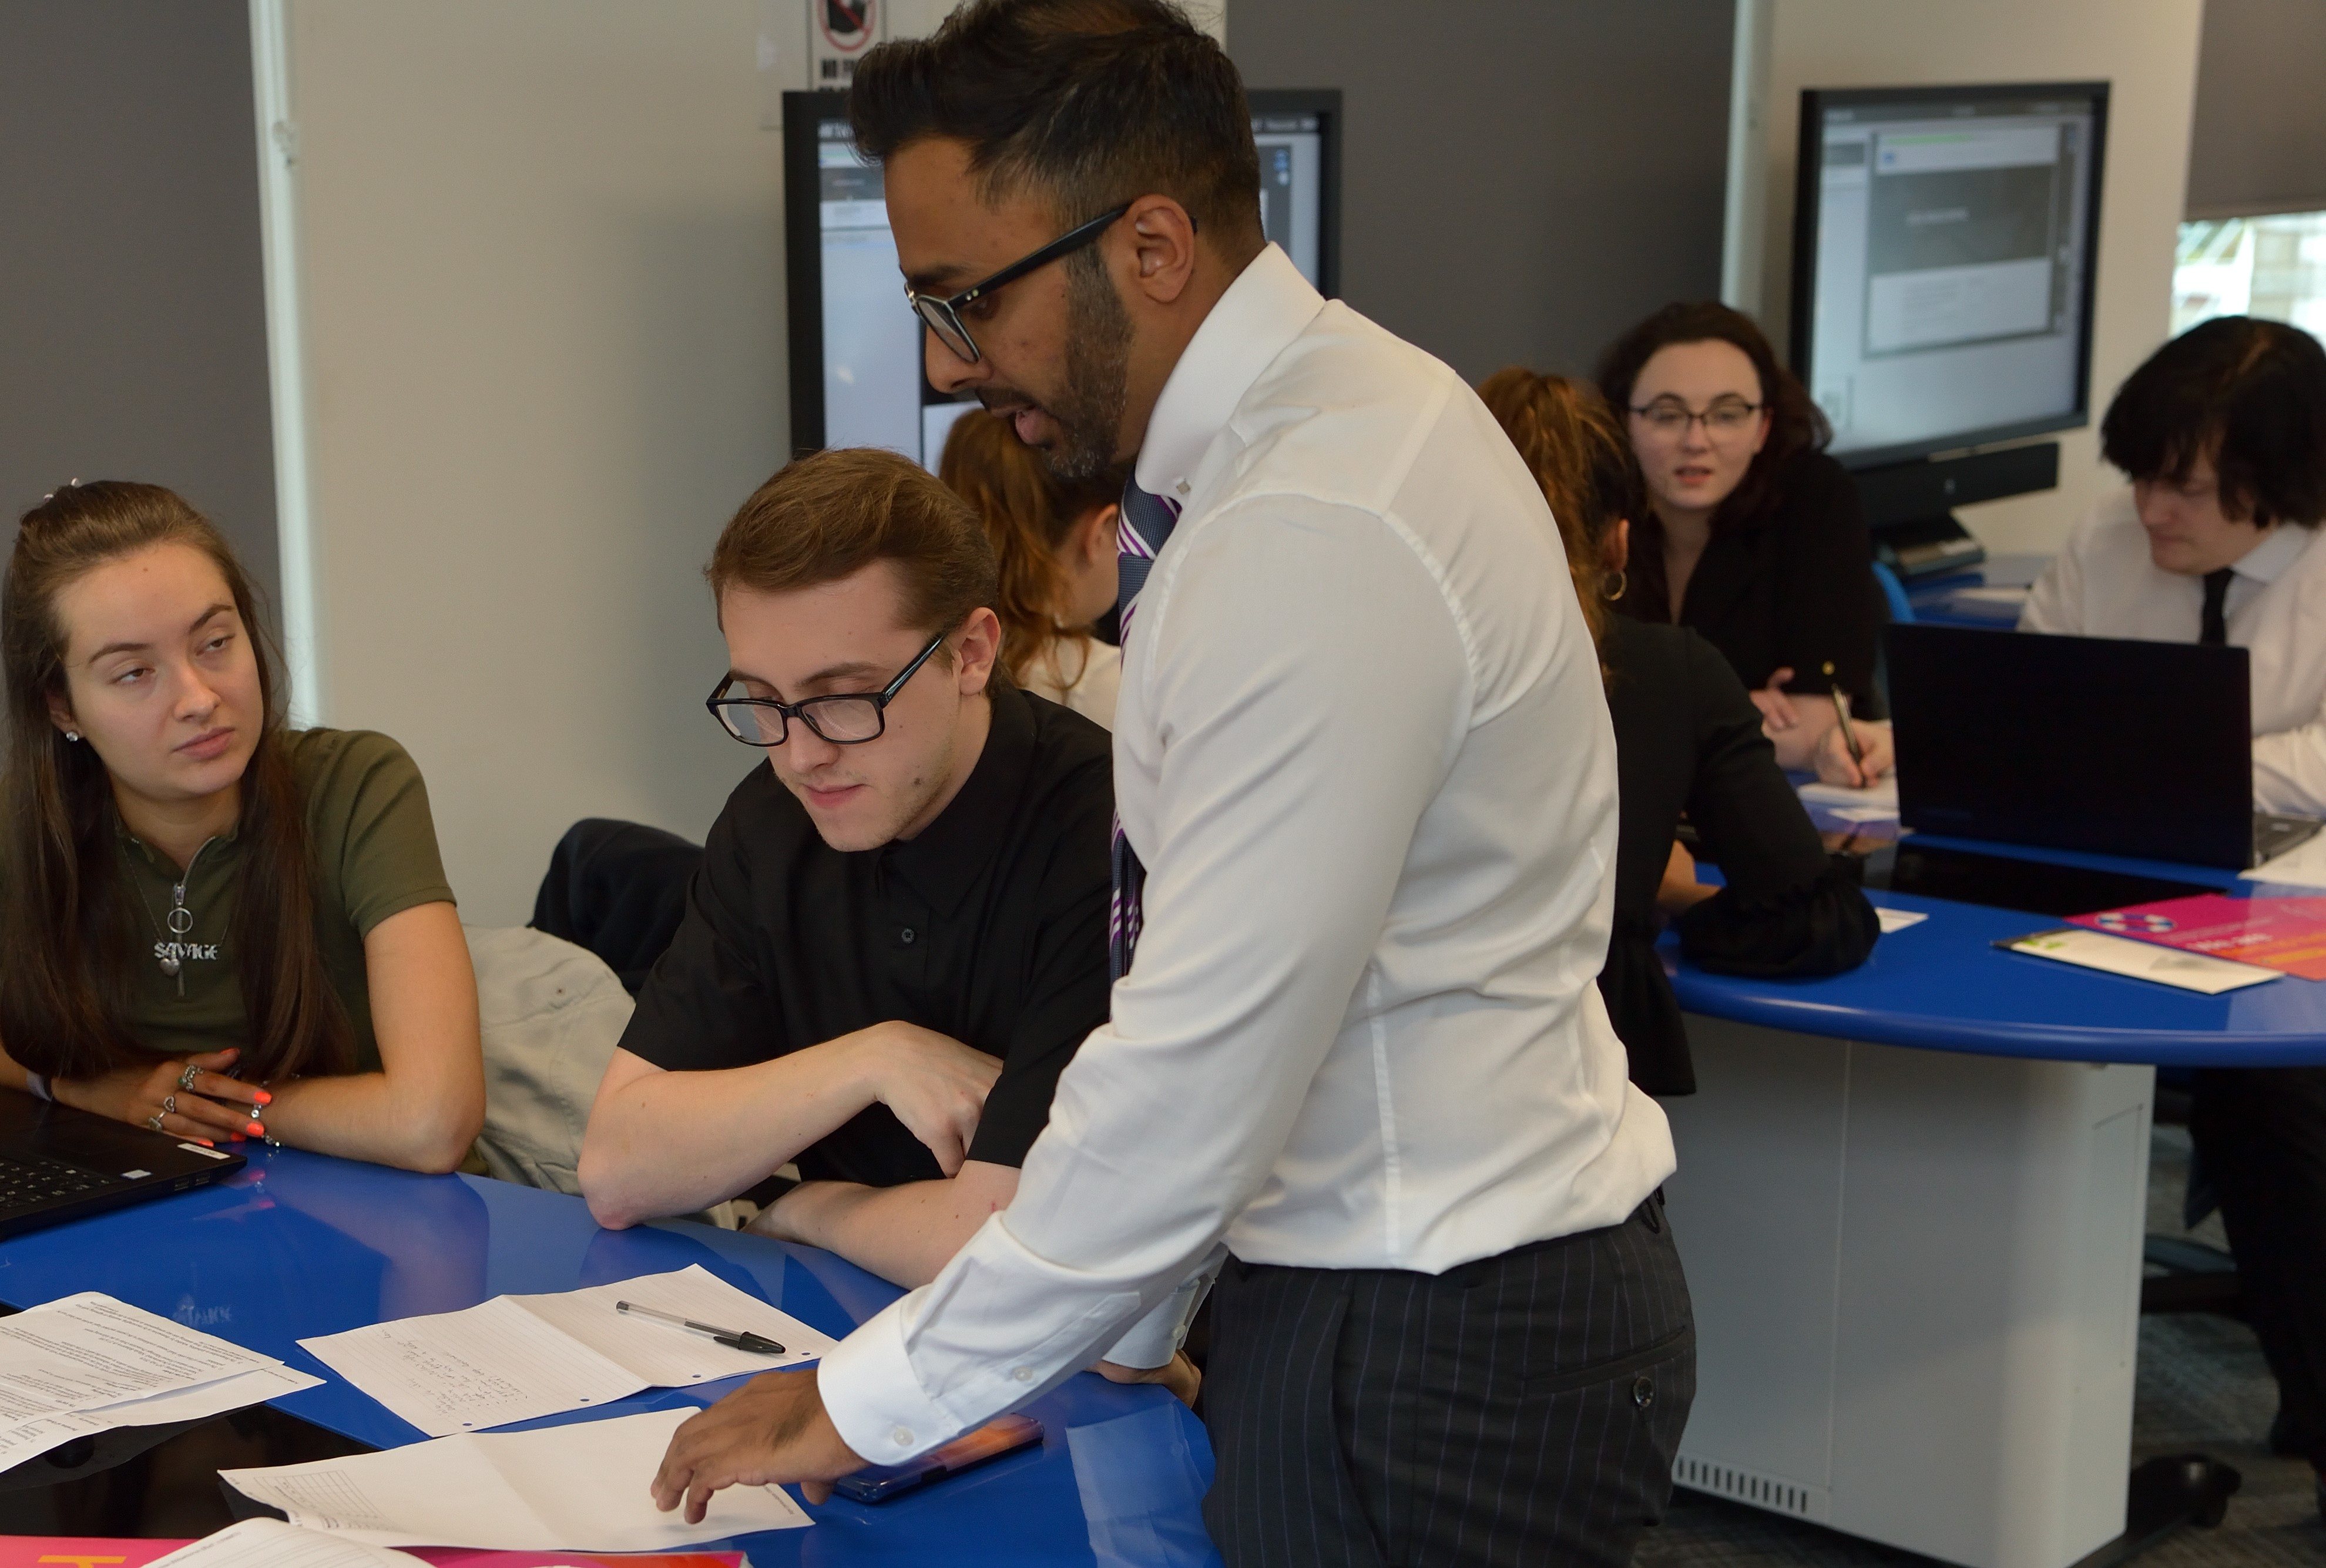 University of Bolton’s free legal advice centre hailed a huge success